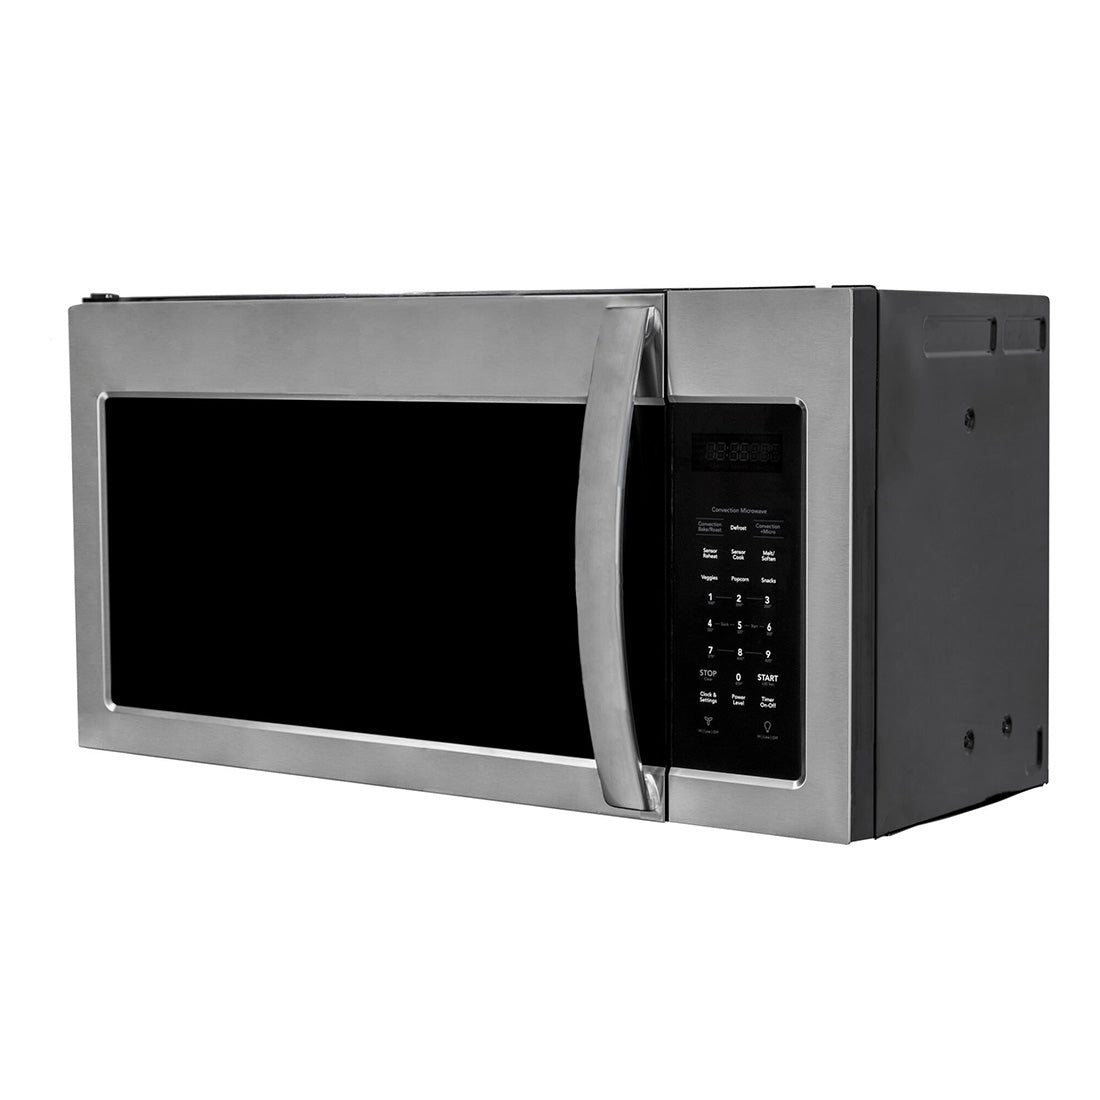 Forté 30 in. 1.5 cu. ft. Over the Range Microwave in Stainless Steel side